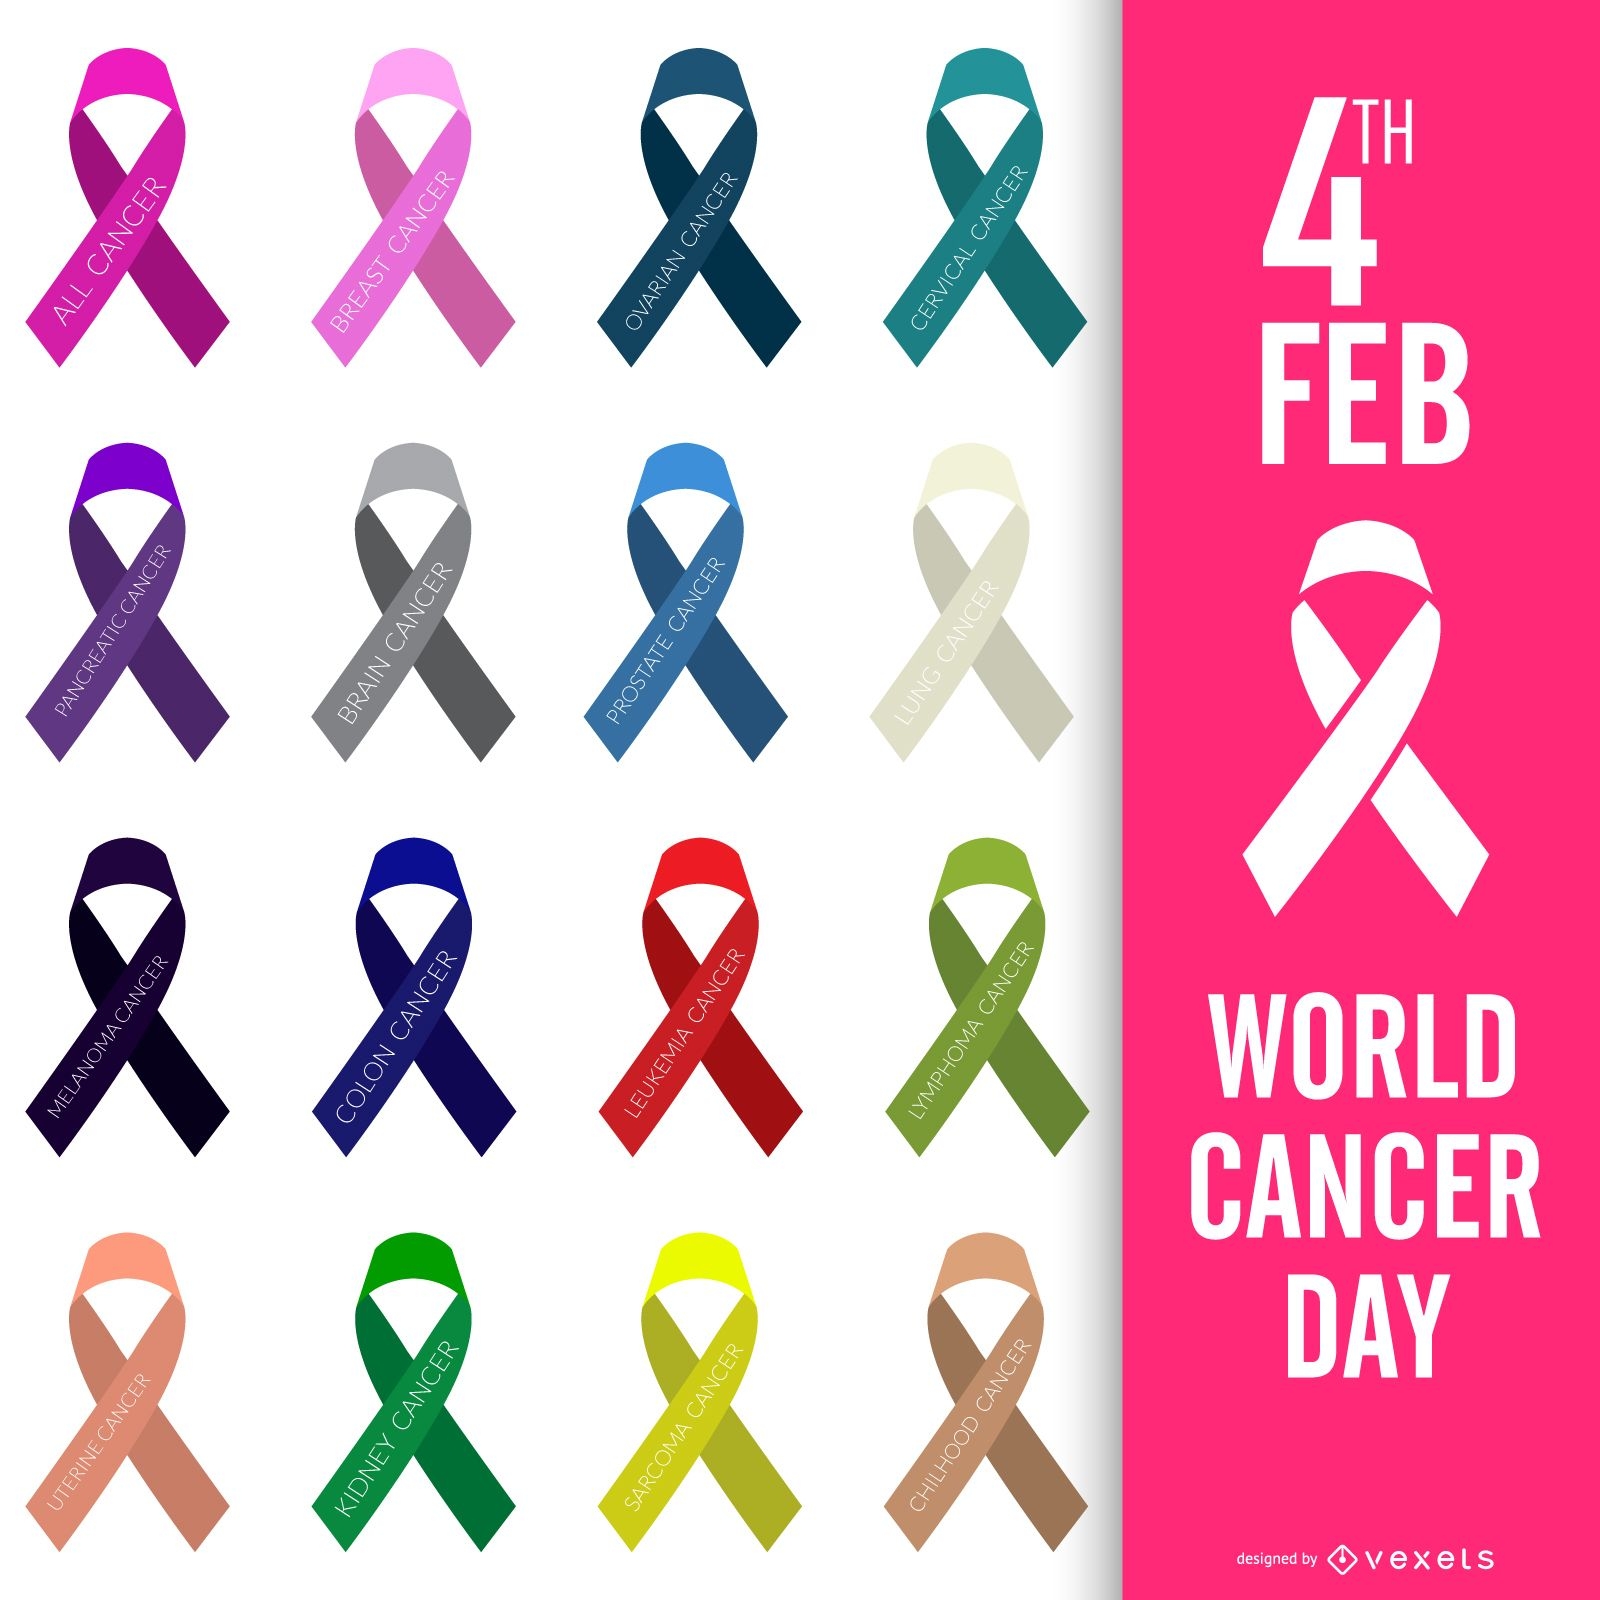 9a3dfda55421806d07b6de3426af82a3 World Cancer Day Poster Colored Ribbons 